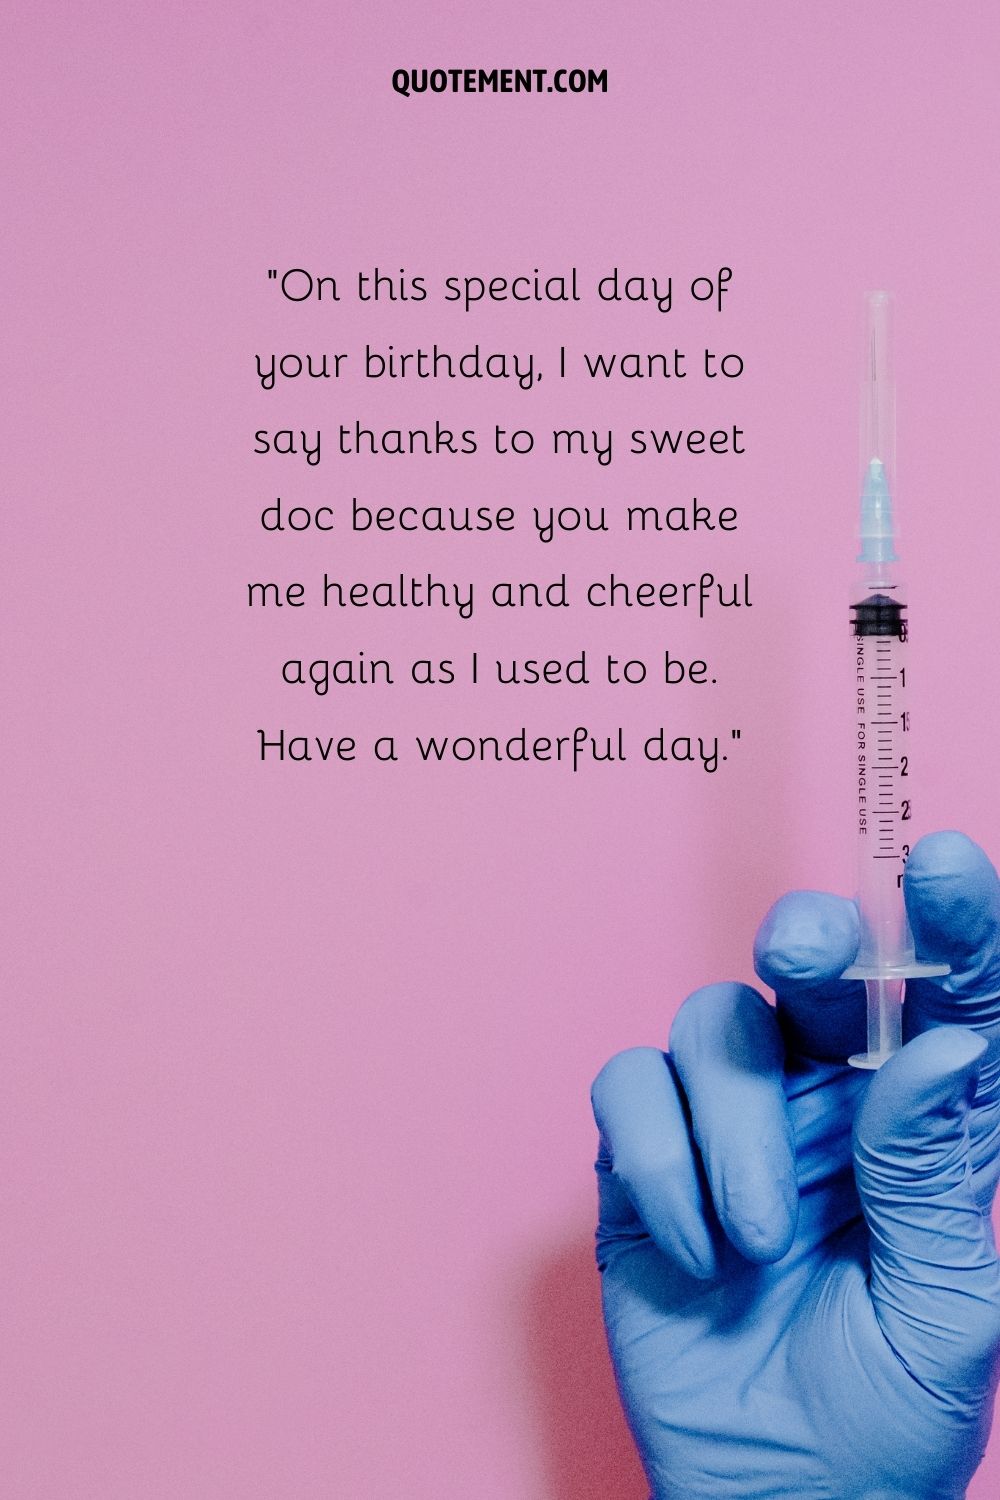 pink background and a syringe representing happy birthday doctor wishes